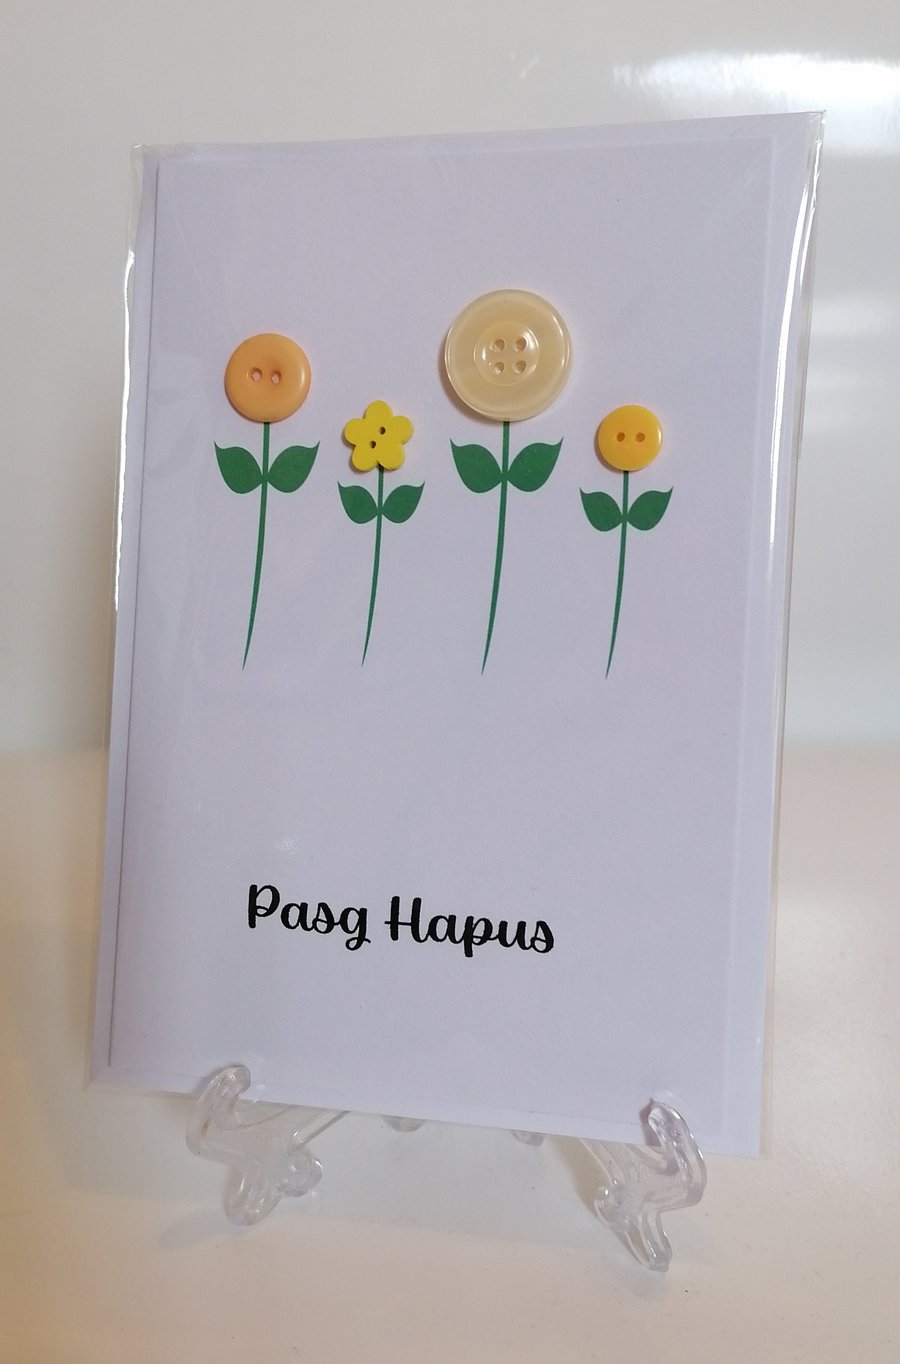 Pasg Hapus Happy Easter yellow flower buttons greetings card 